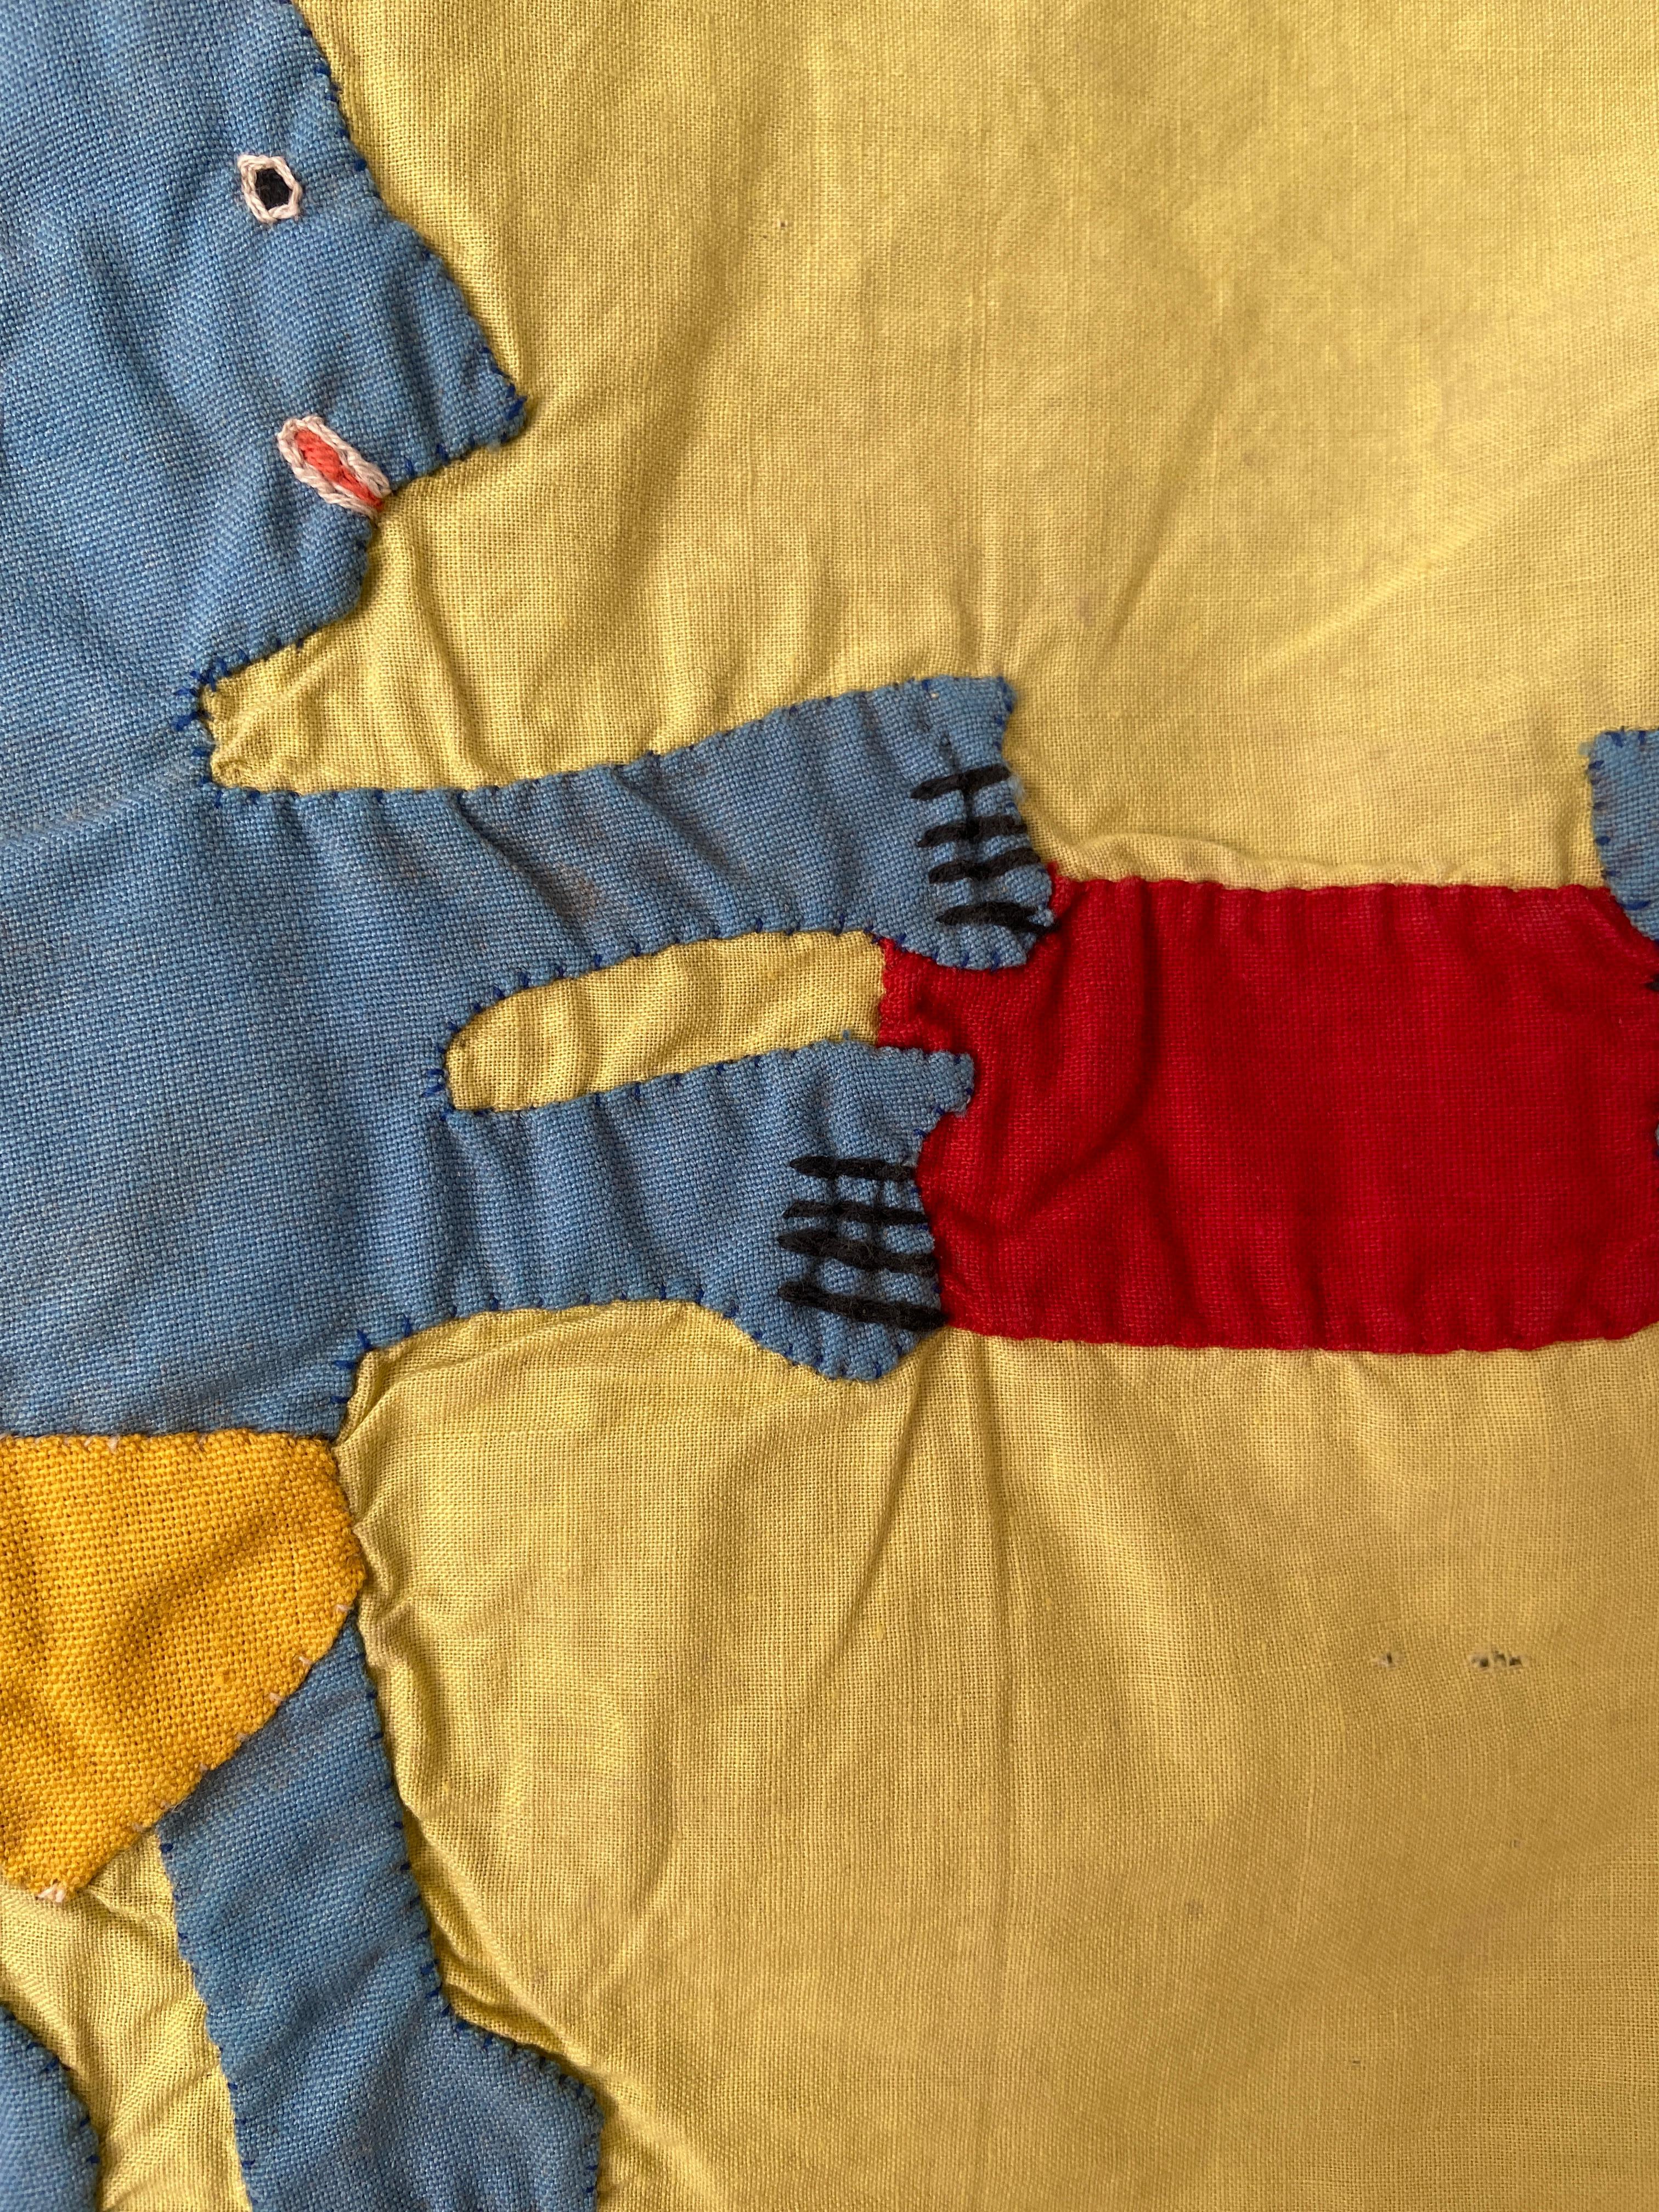 Late 20th Century  Vintage Asafo Flag in Yellow Appliqué Patterns by the Fante People, Ghana 1970s